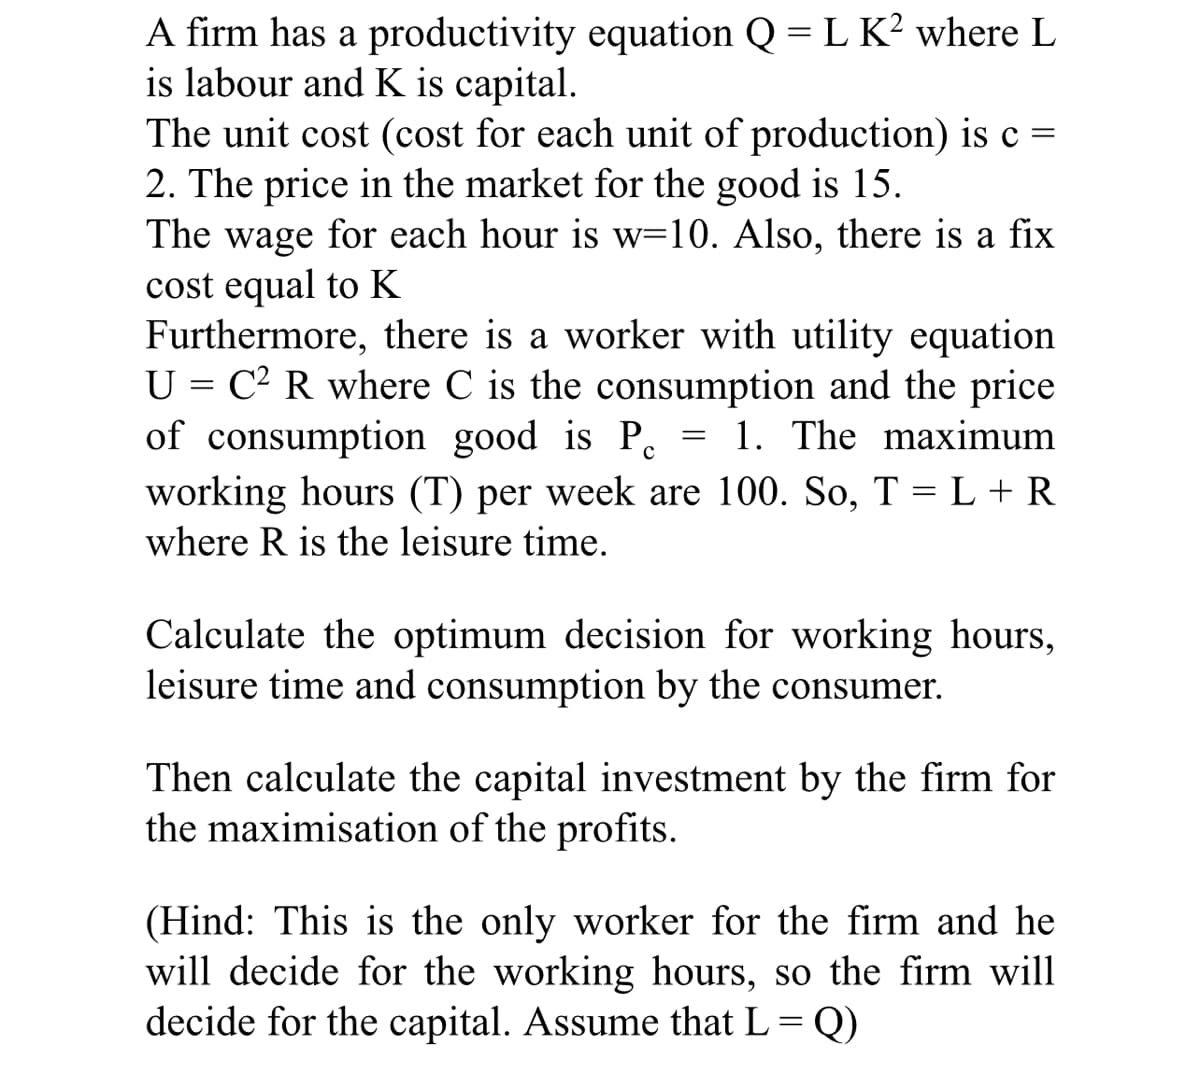 A firm has a productivity equation Q = L K² where L
is labour and K is capital.
The unit cost (cost for each unit of production) is c =
2. The price in the market for the good is 15.
The wage for each hour is w=10. Also, there is a fix
cost equal to K
Furthermore, there is a worker with utility equation
U = C² R where C is the consumption and the price
of consumption good is P 1. The maximum
working hours (T) per week are 100. So, T = L + R
where R is the leisure time.
с
=
Calculate the optimum decision for working hours,
leisure time and consumption by the consumer.
Then calculate the capital investment by the firm for
the maximisation of the profits.
(Hind: This is the only worker for the firm and he
will decide for the working hours, so the firm will
decide for the capital. Assume that L = Q)